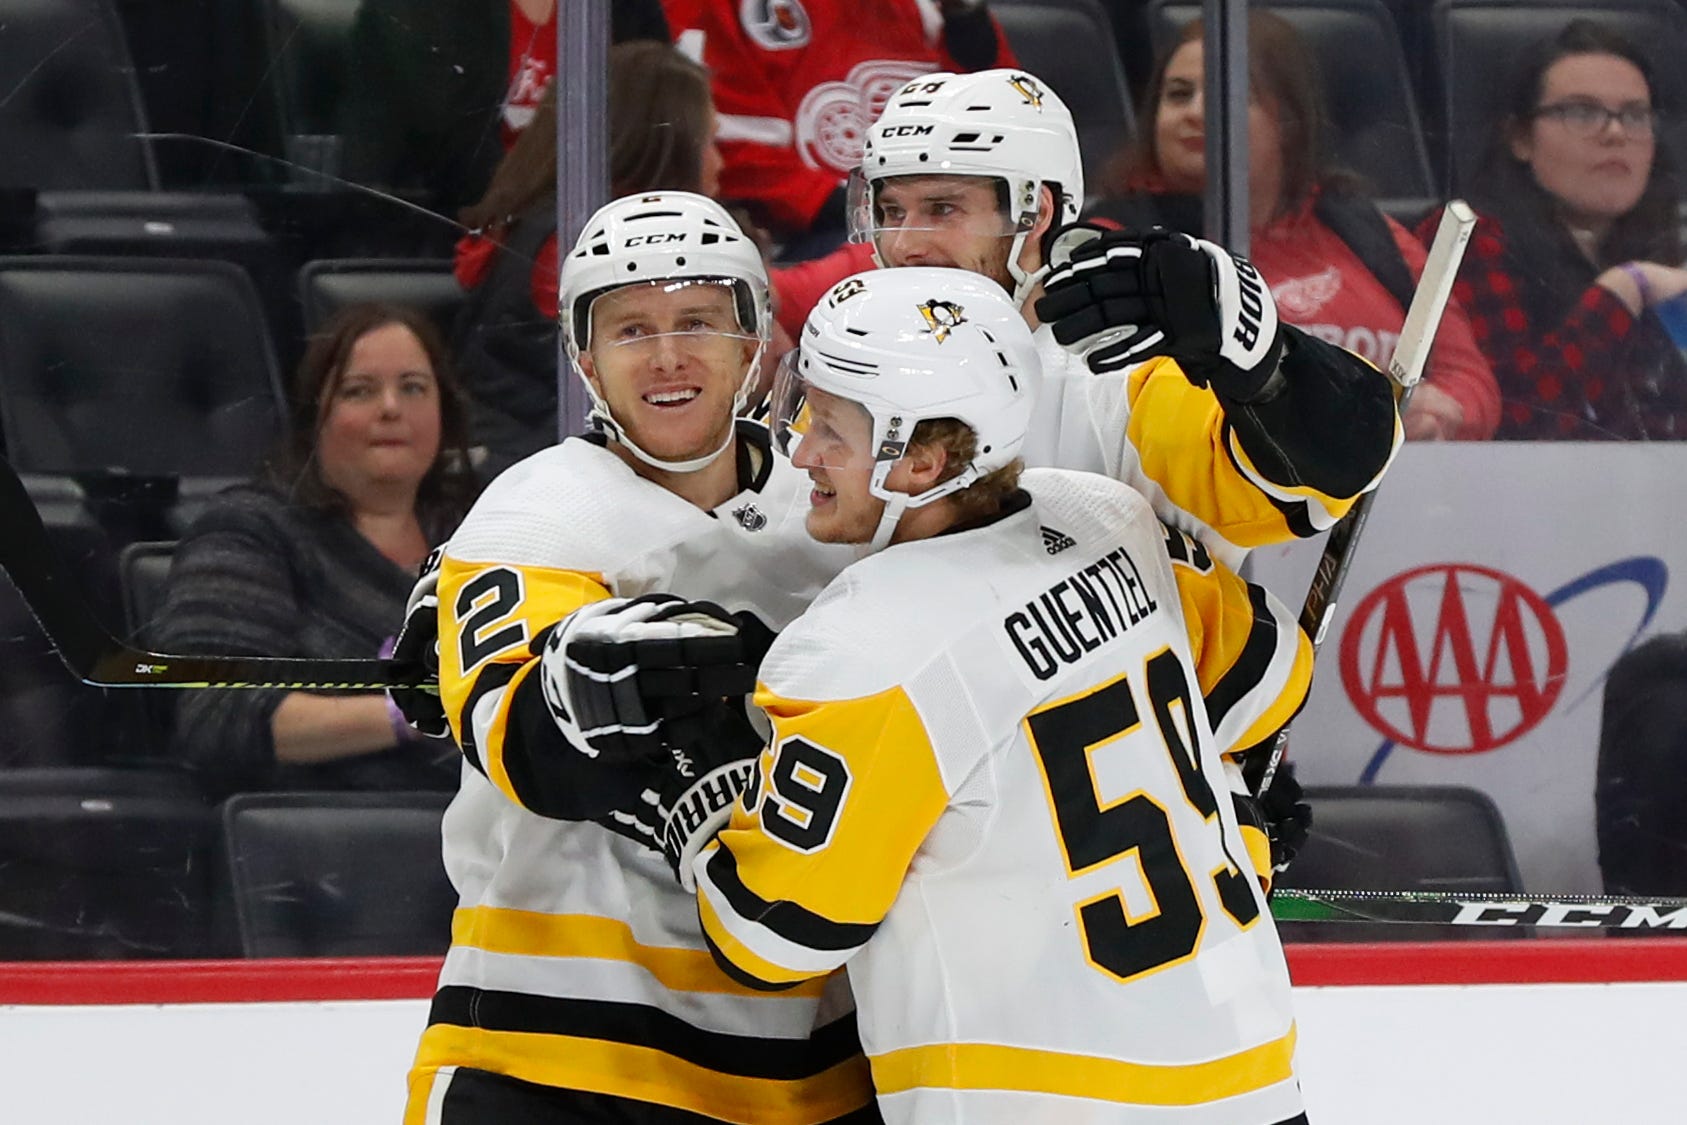 Pittsburgh Penguins defenseman Chad Ruhwedel (2) celebrates his goal with Marcus Pettersson (28) and Jake Guentzel (59) in the first period.